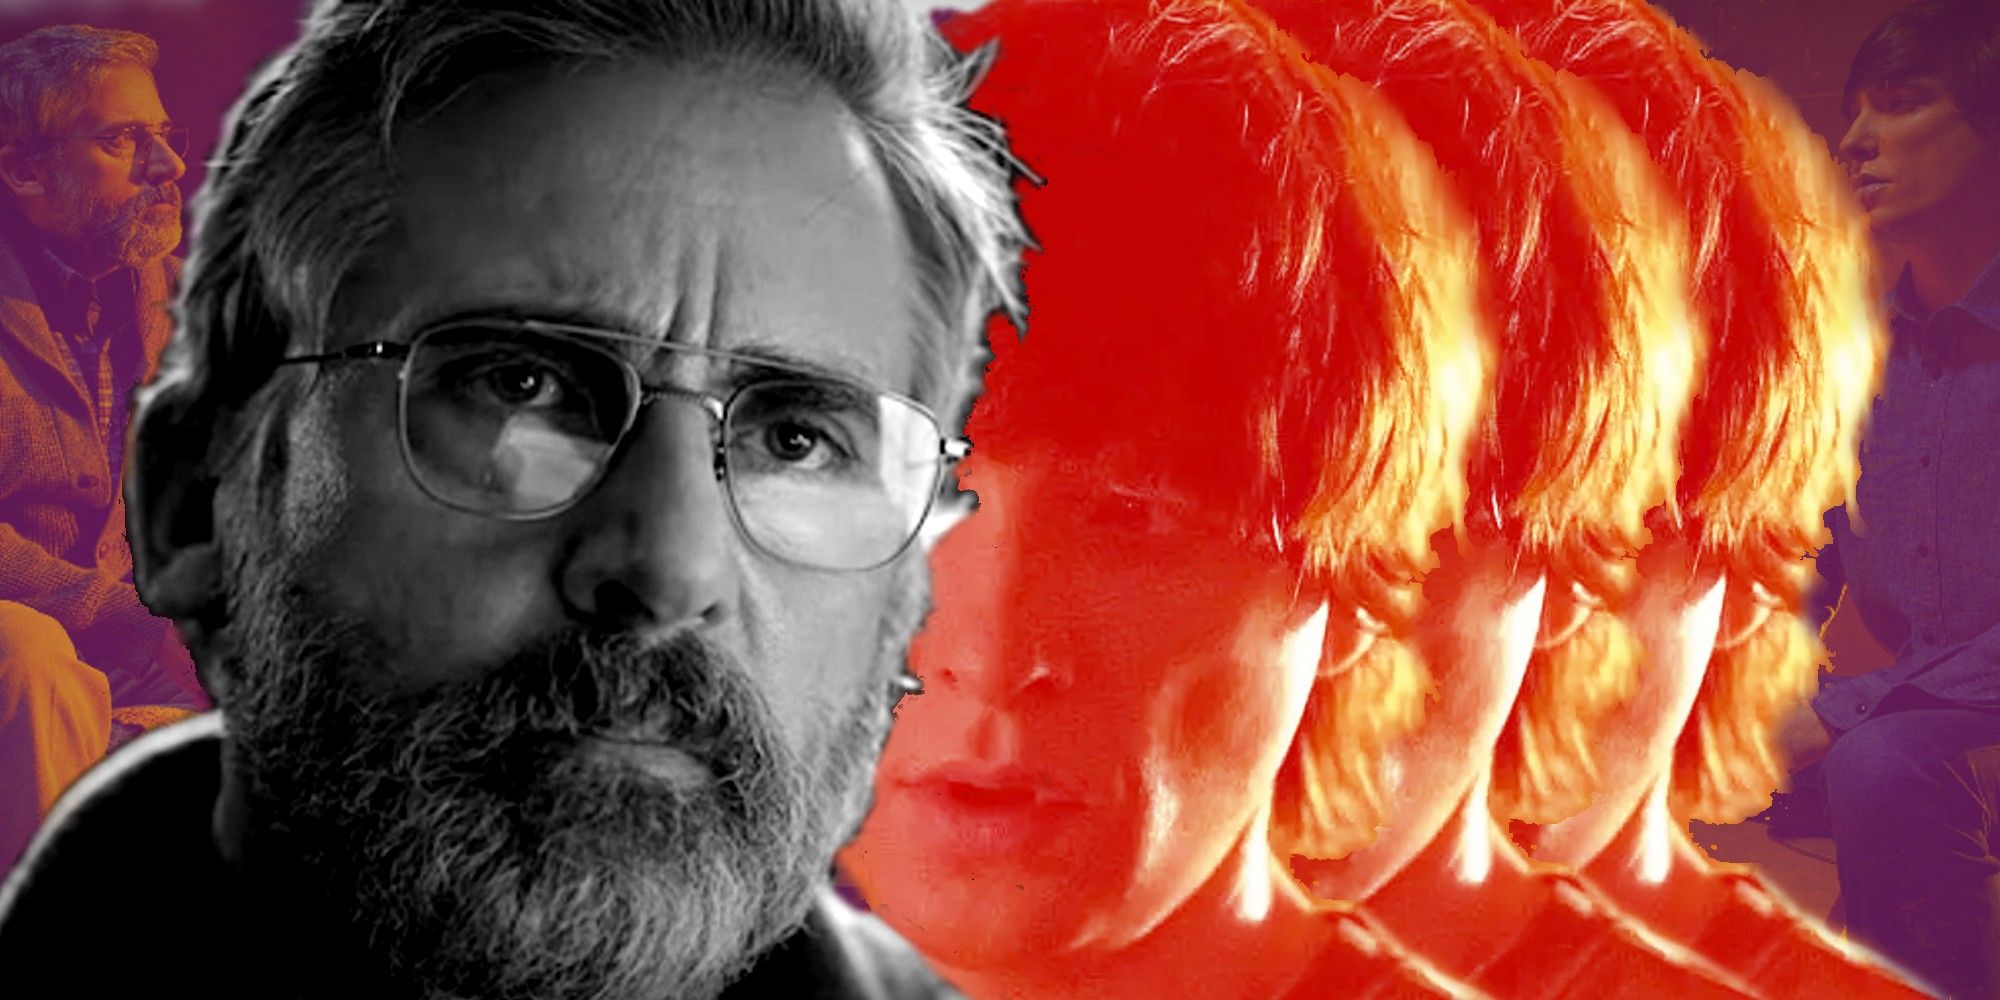 Collage of Steve Carell as Doctor Alan Strauss and Domnhall Gleeson as Sam in The Patient